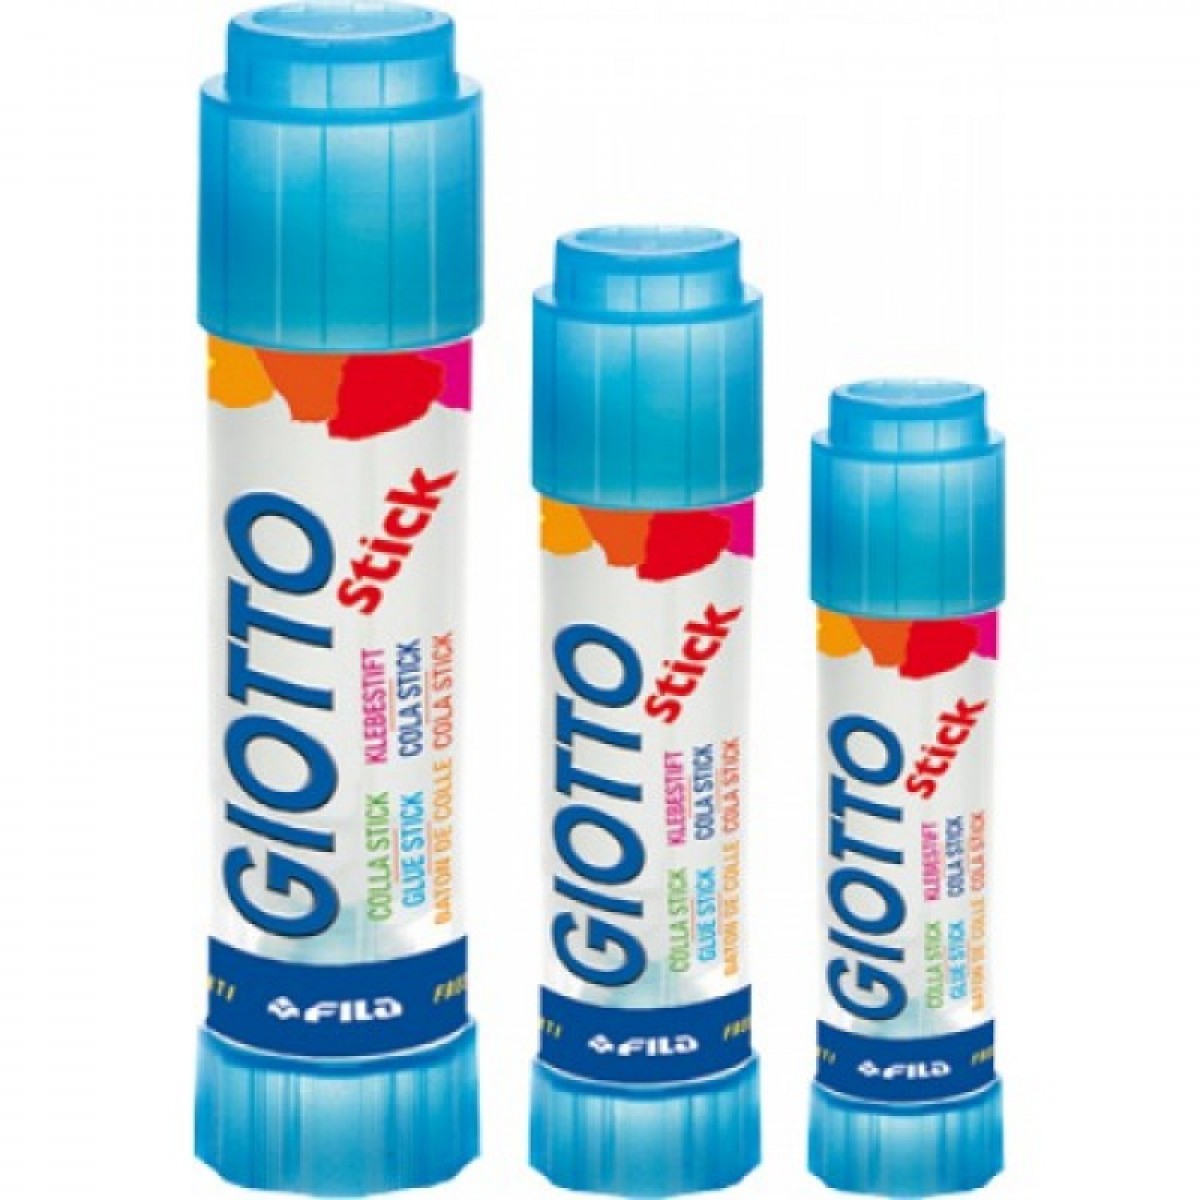 Giotto Κόλλα Stick 40gr Υλικά Χειροτεχνίας